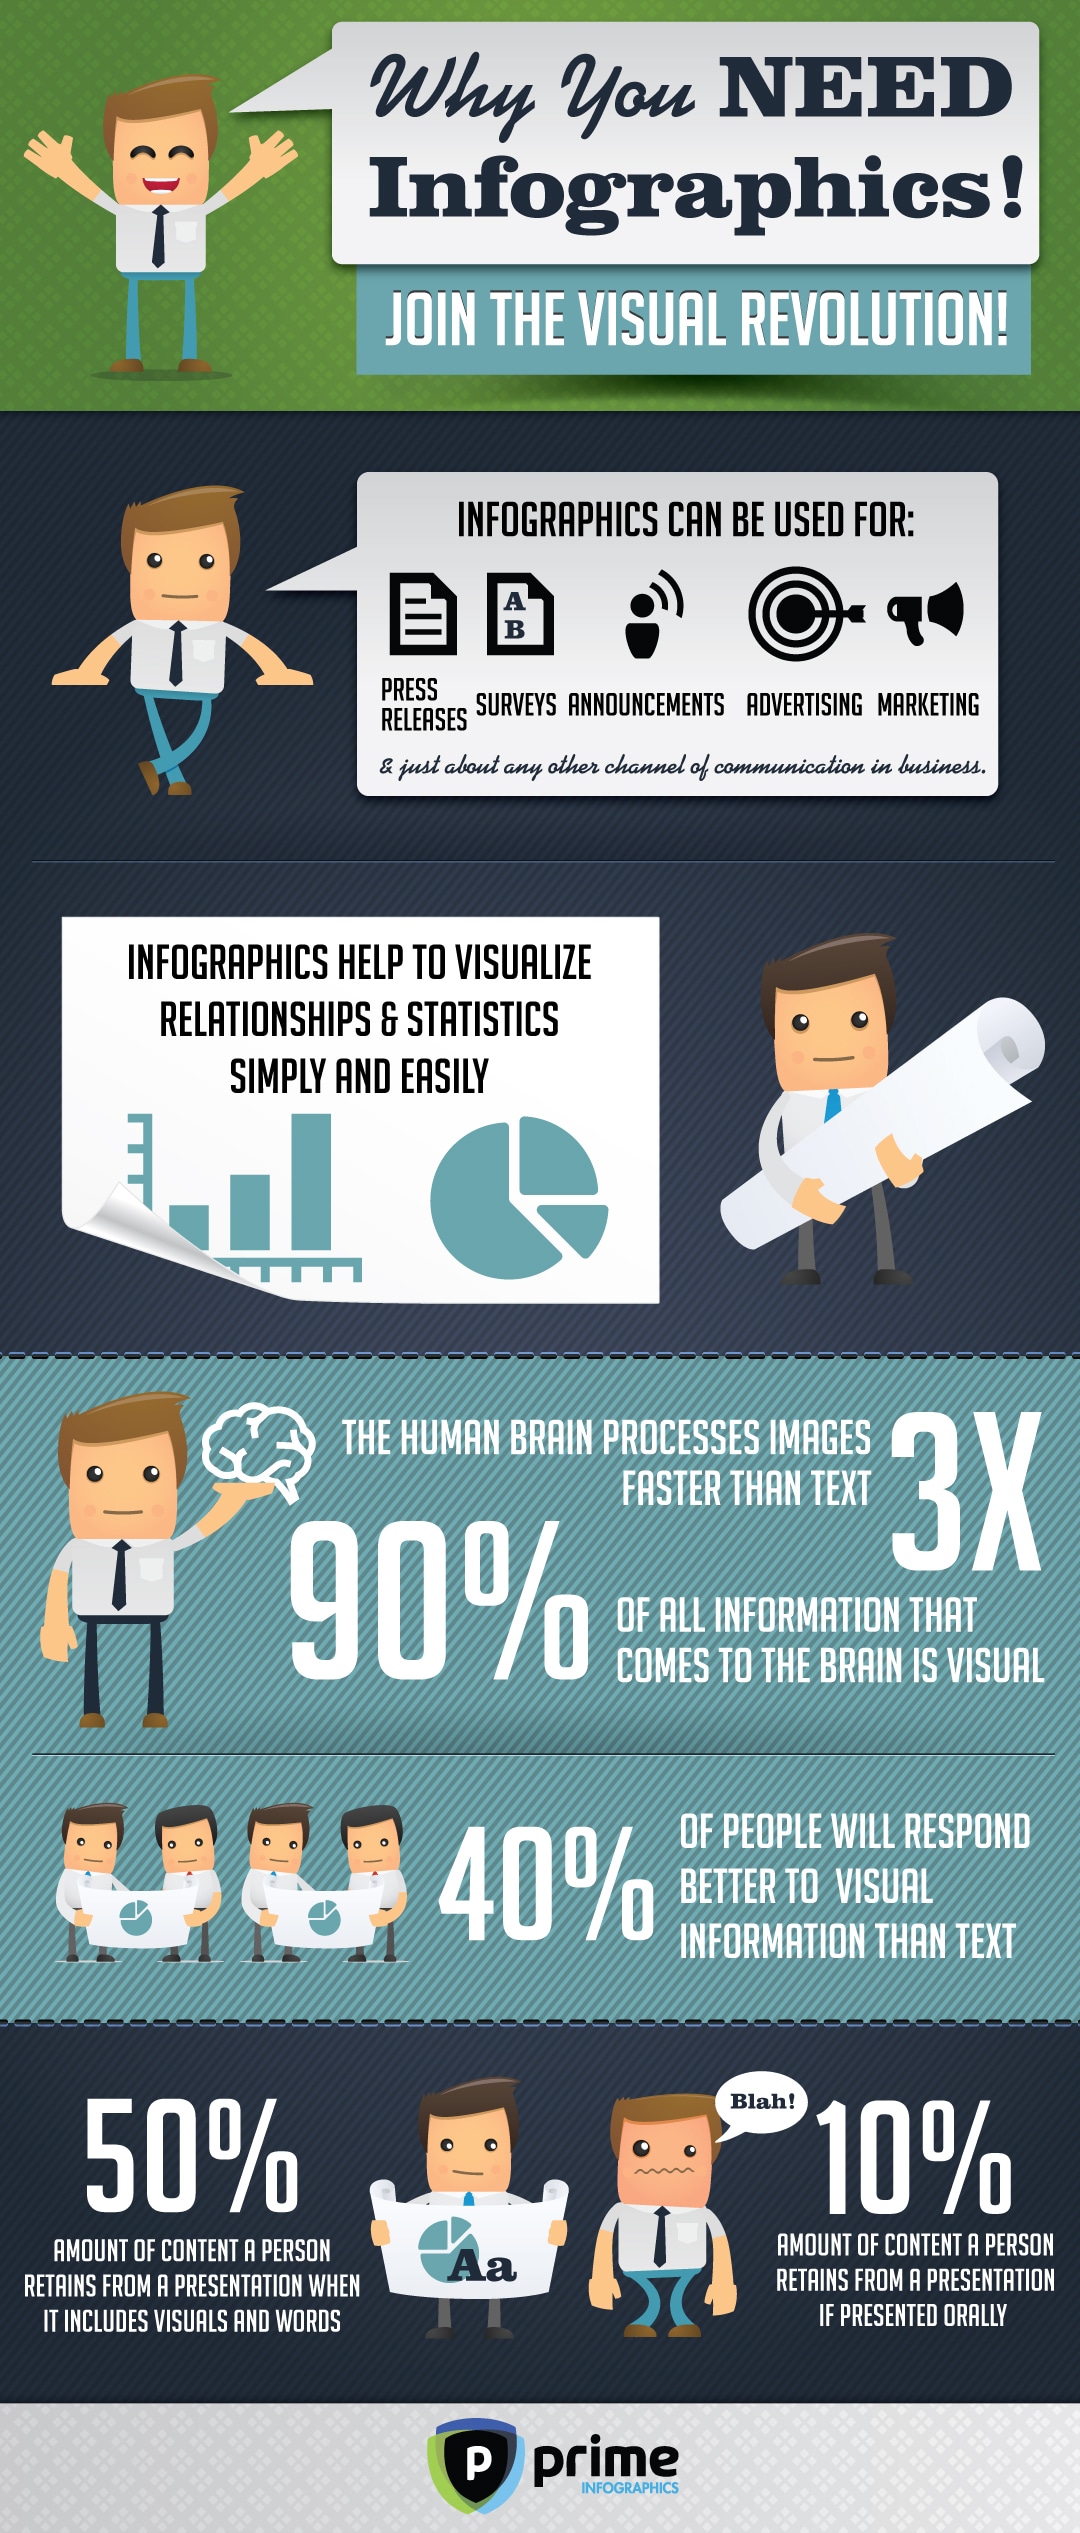 visual-information-research-results-infographic